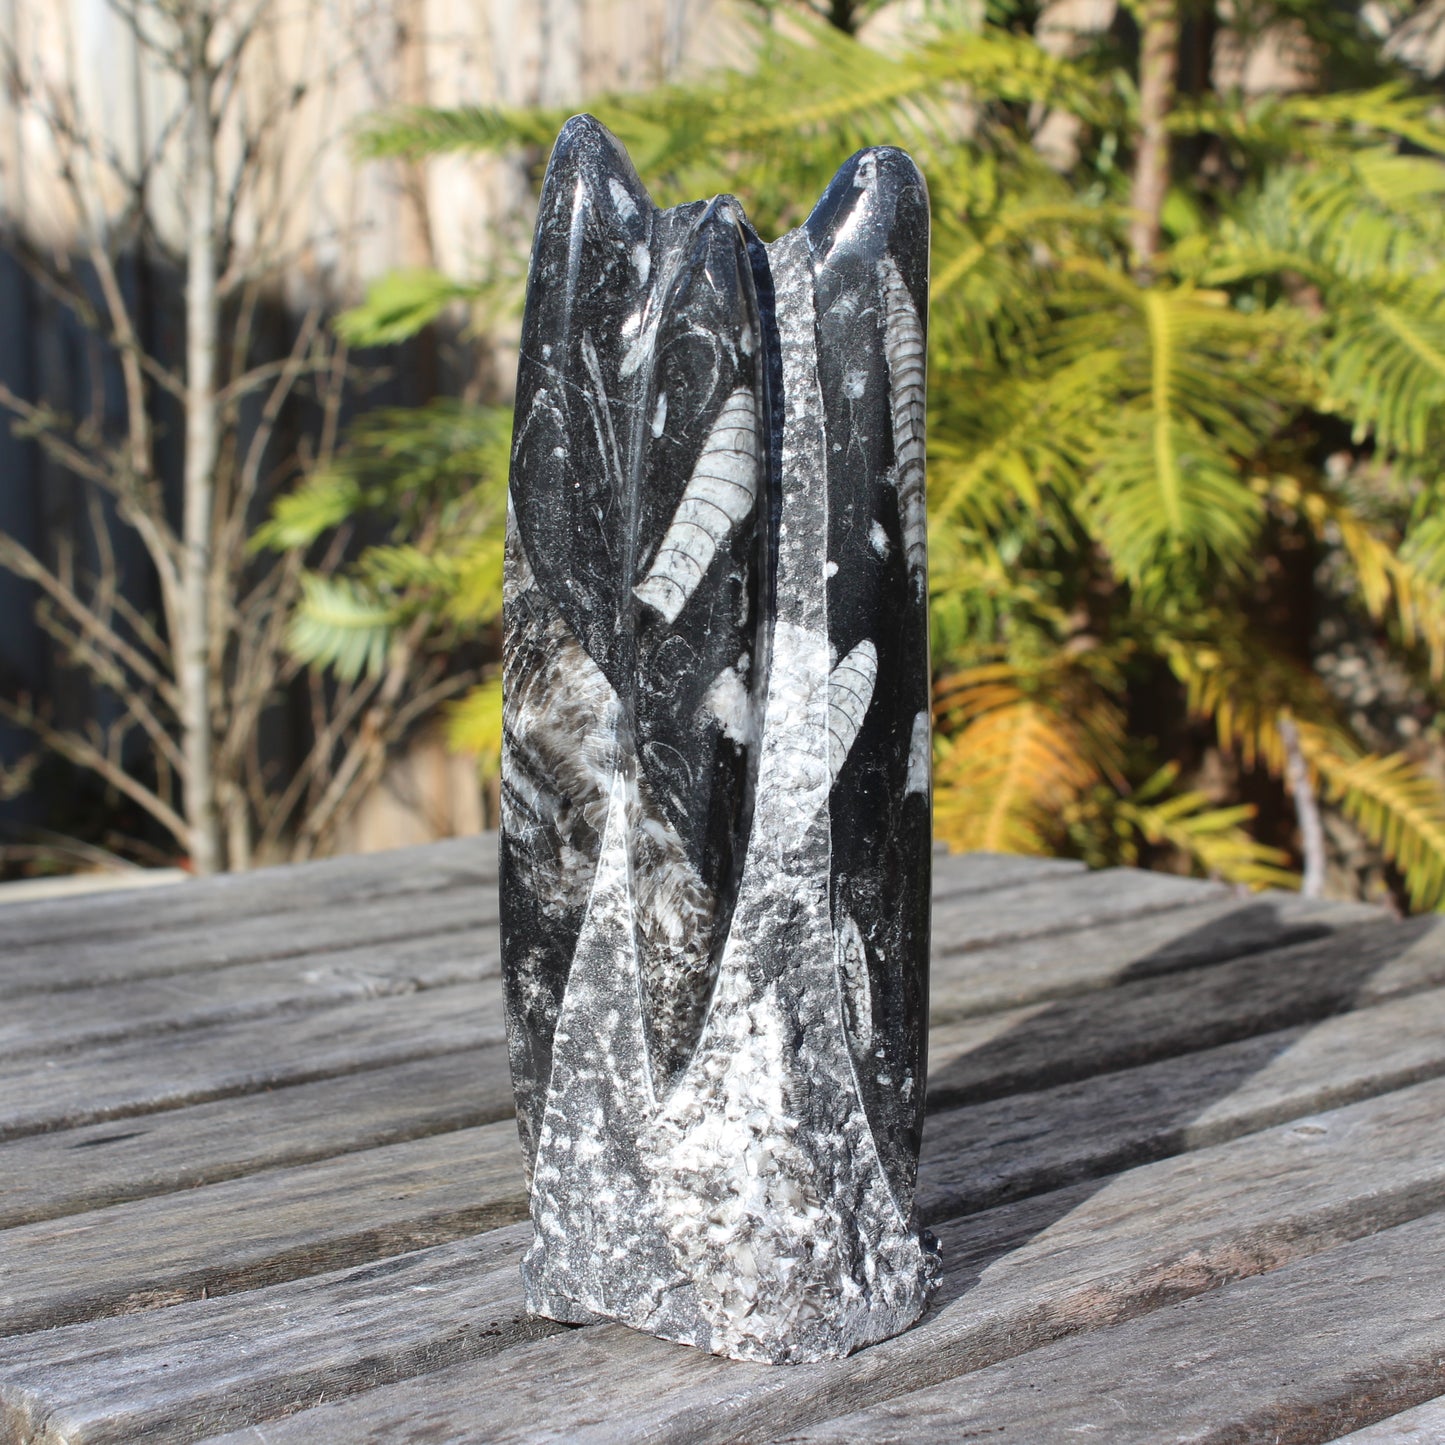 Orthoceras fossil tower 1279g